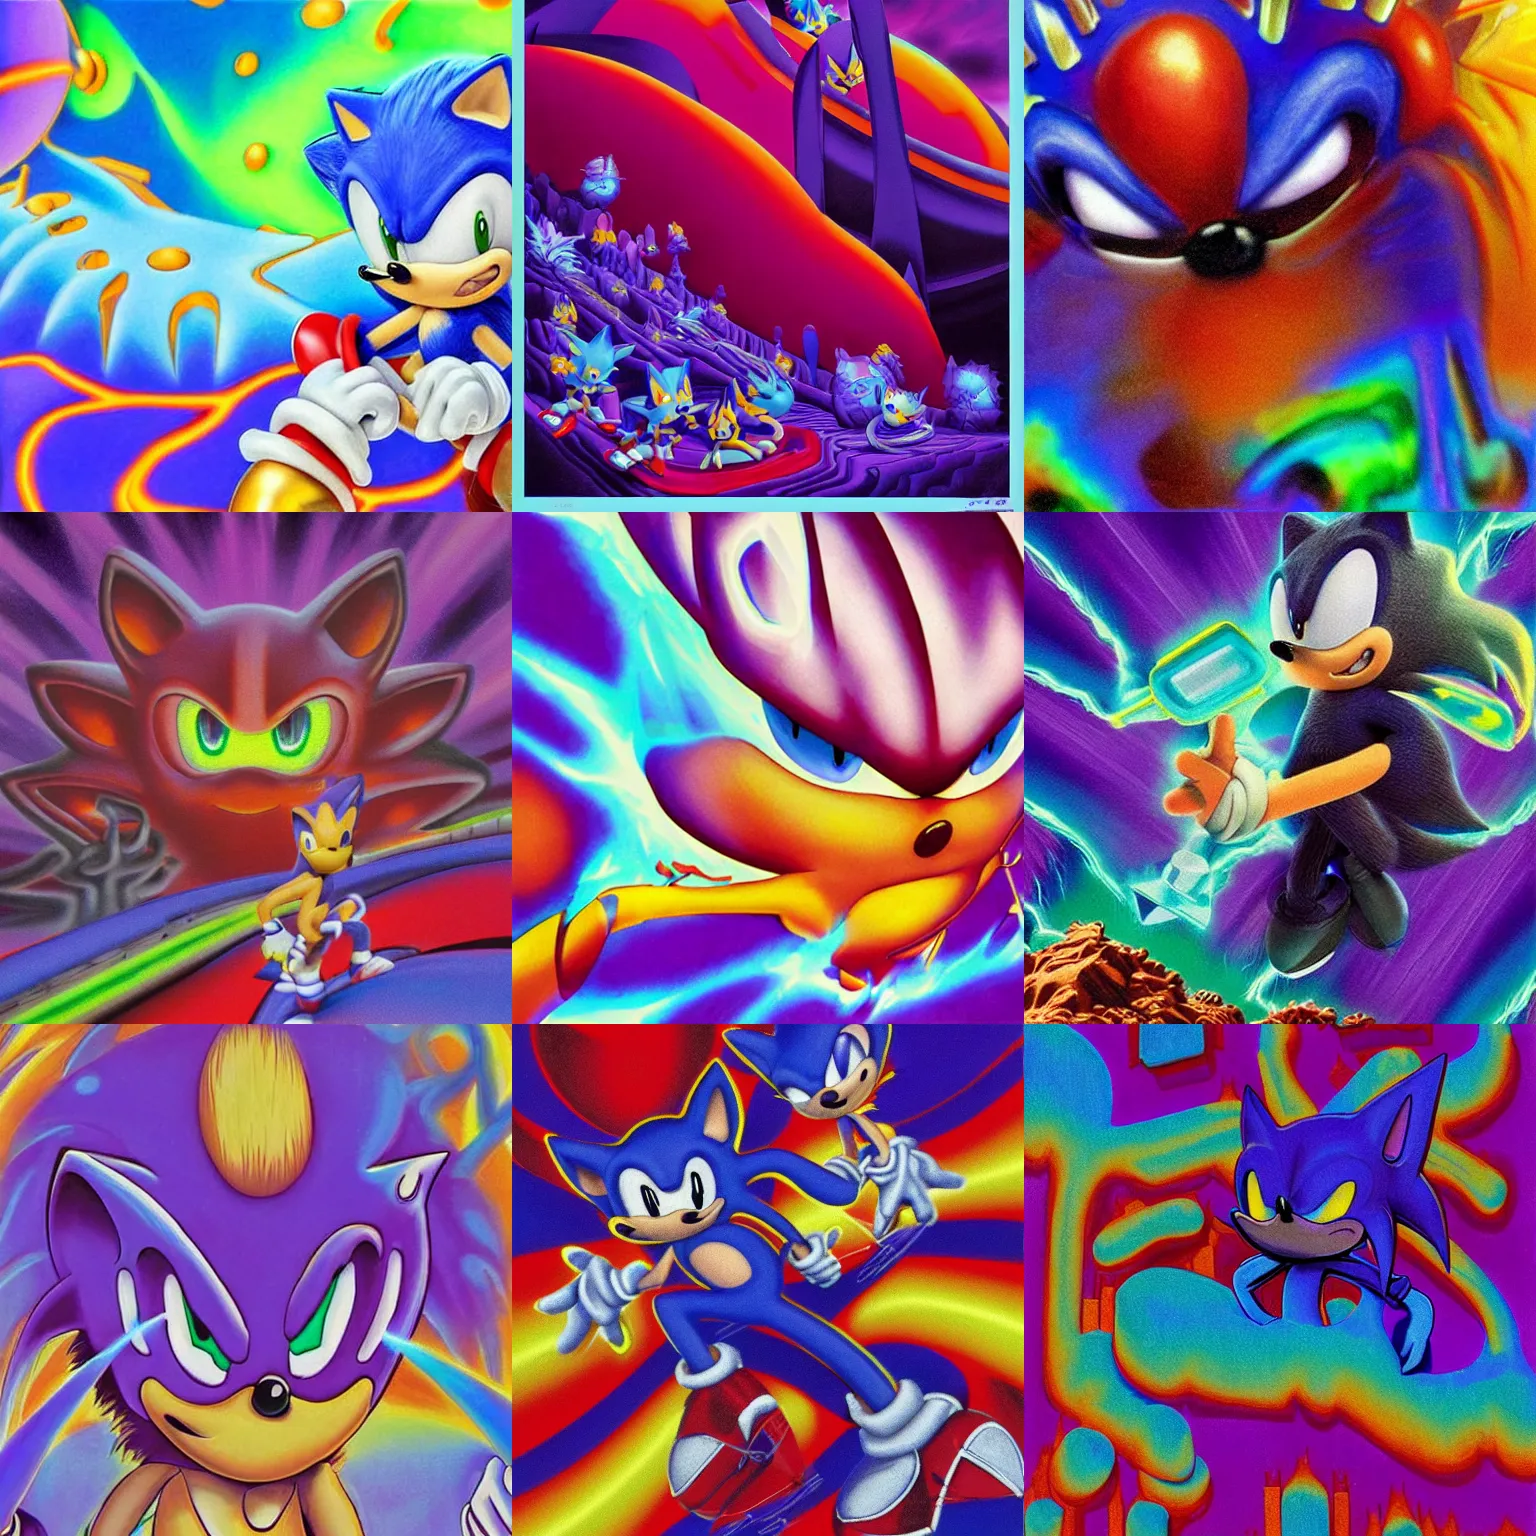 Prompt: sonic the hedgehog closeup portrait dreaming of lava lamp claymation scifi matte painting landscape of a surreal alex grey, sonic retro moulded professional soft pastels high quality airbrush art album cover of a liquid dissolving airbrush sonic the hedgehog art lsd sonic the hedgehog swimming through cyberspace purple checkerboard background 1 9 8 0 s 1 9 8 2 sega genesis video game